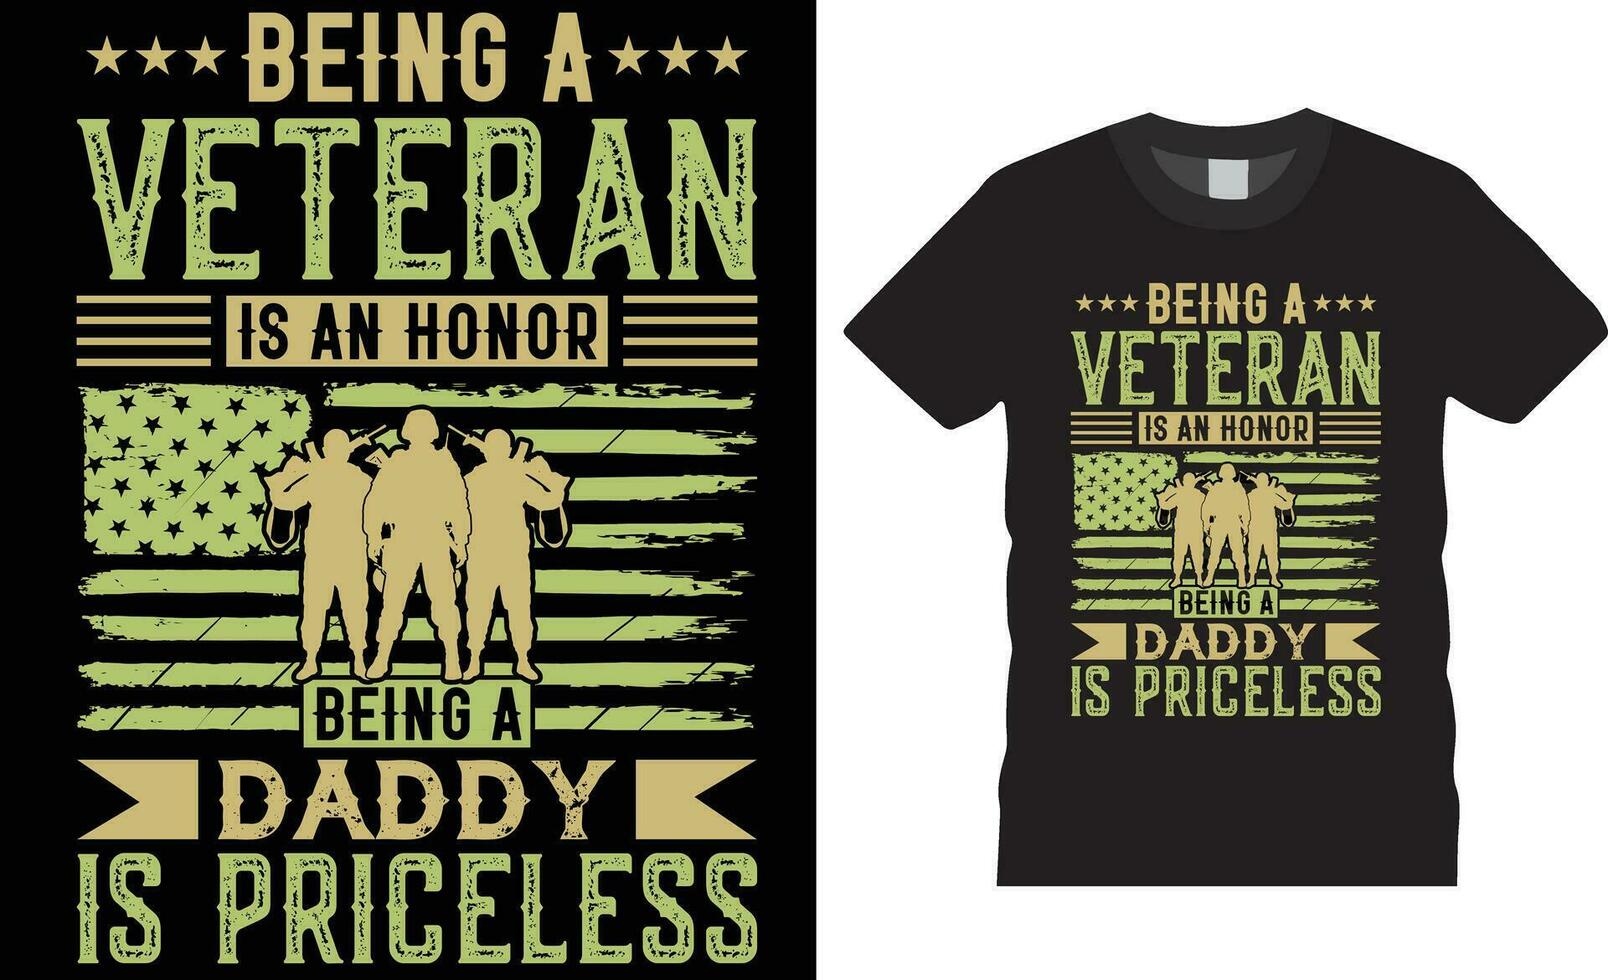 Being a veteran is an honor being a daddy is priceless American Veteran t-shirt design vector template.